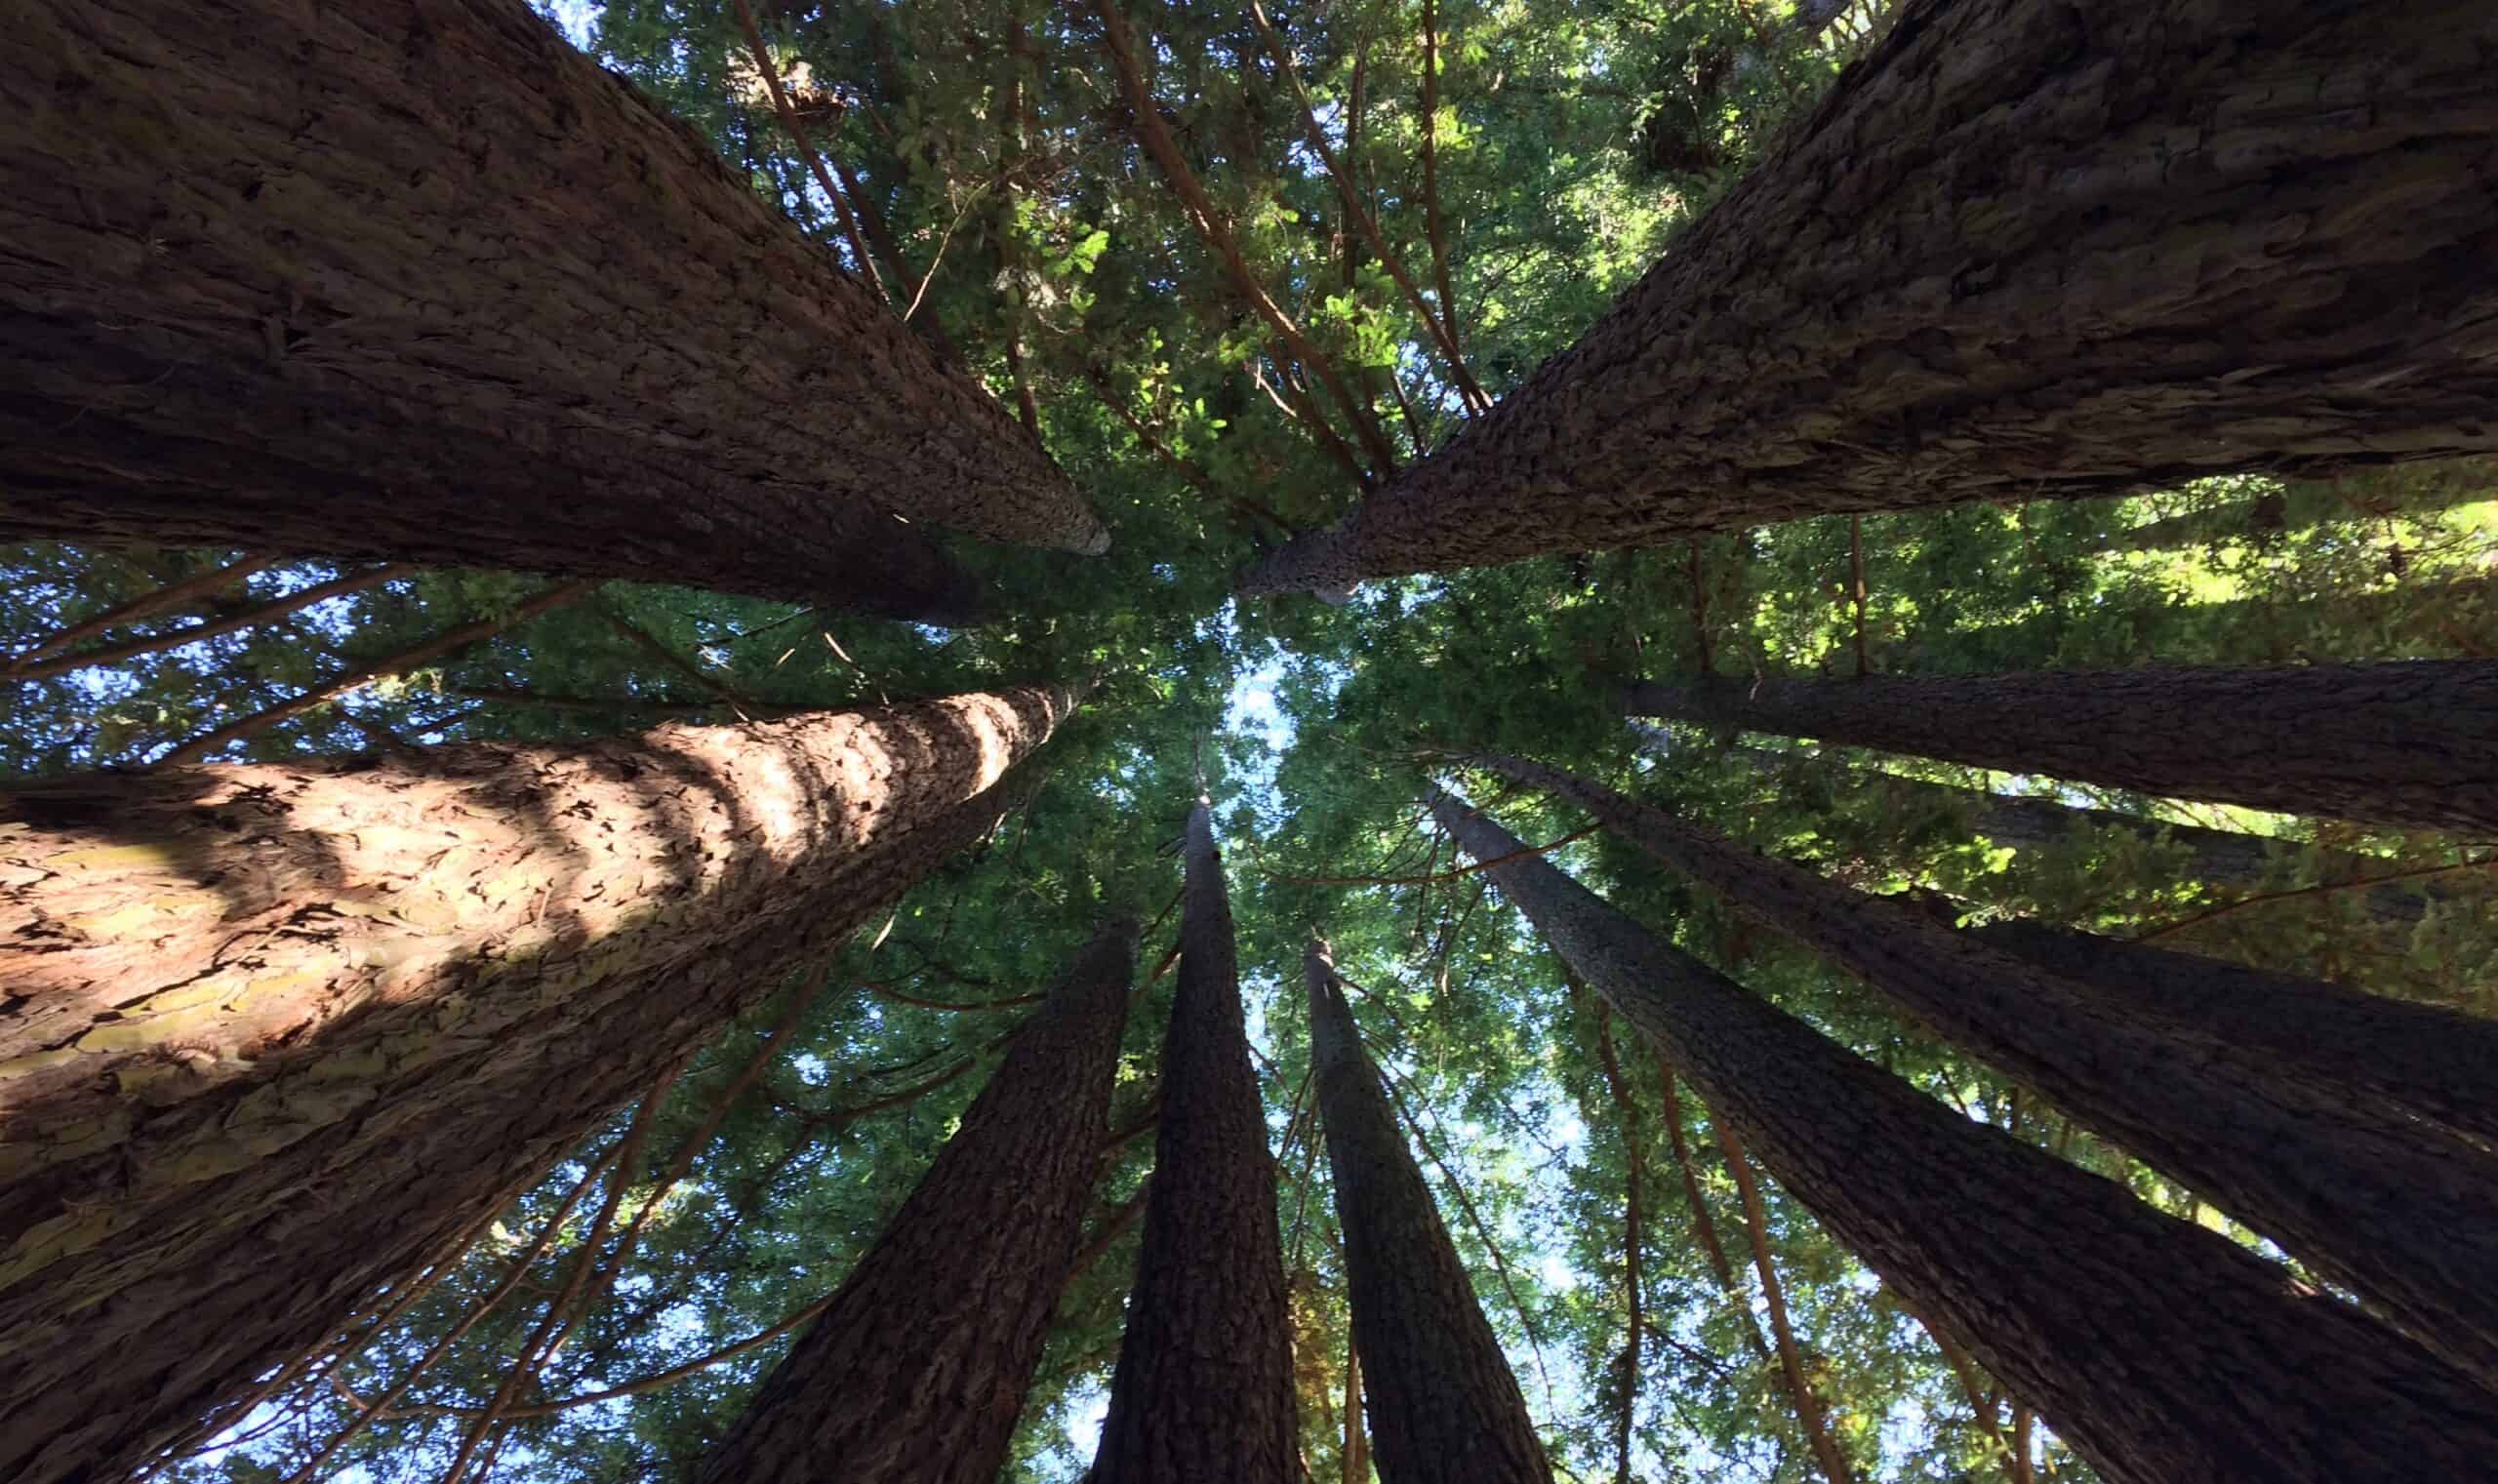 A towering congregation of sequoia trees reaching towards the sky in a majestic forest display.